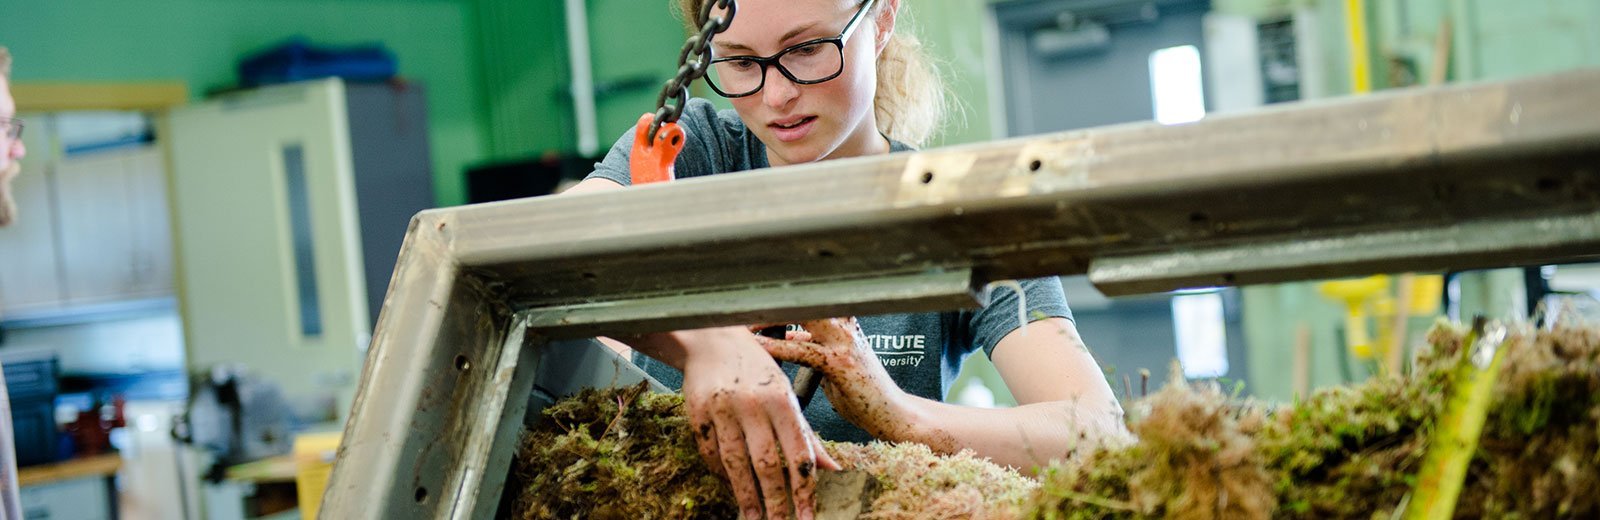 Student cutting samples from a section of peat in a lab.